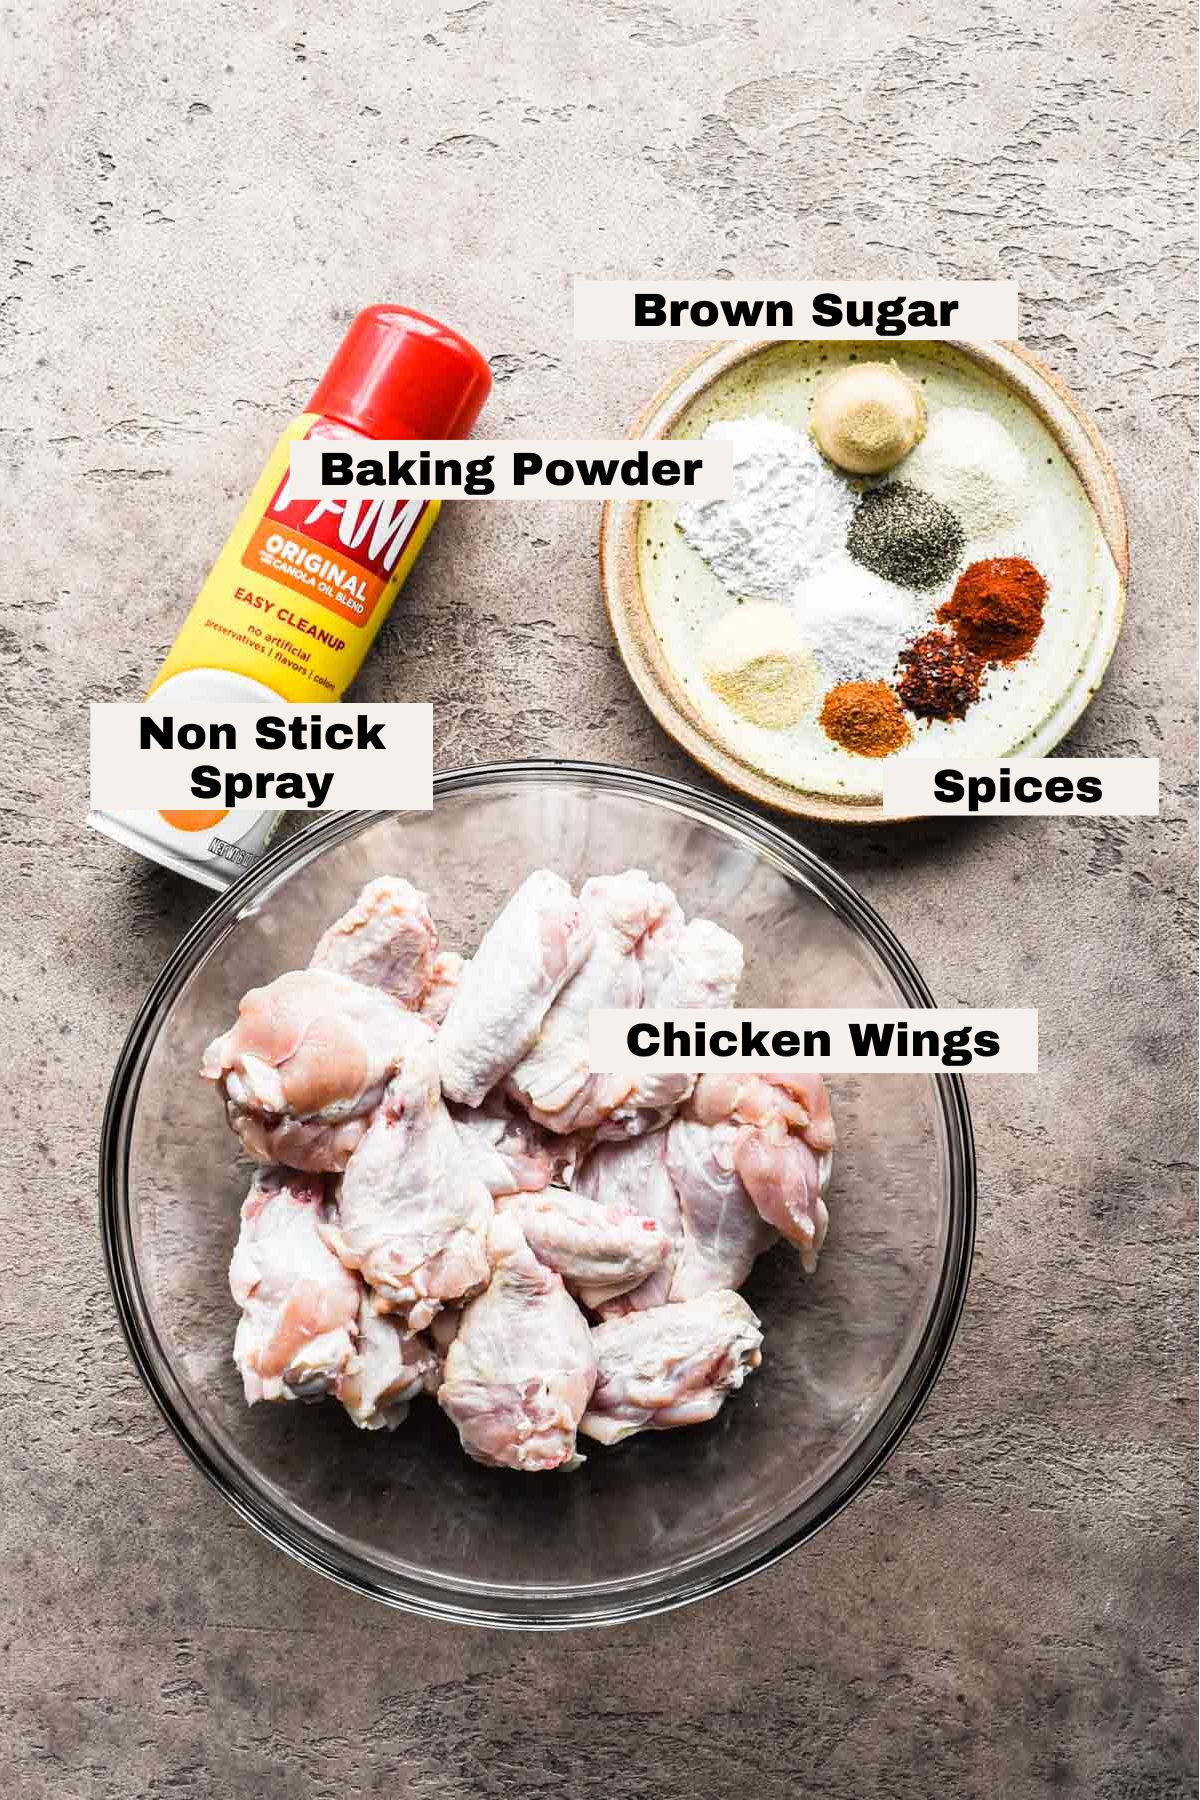 Ingredients for dry rub chicken wings.